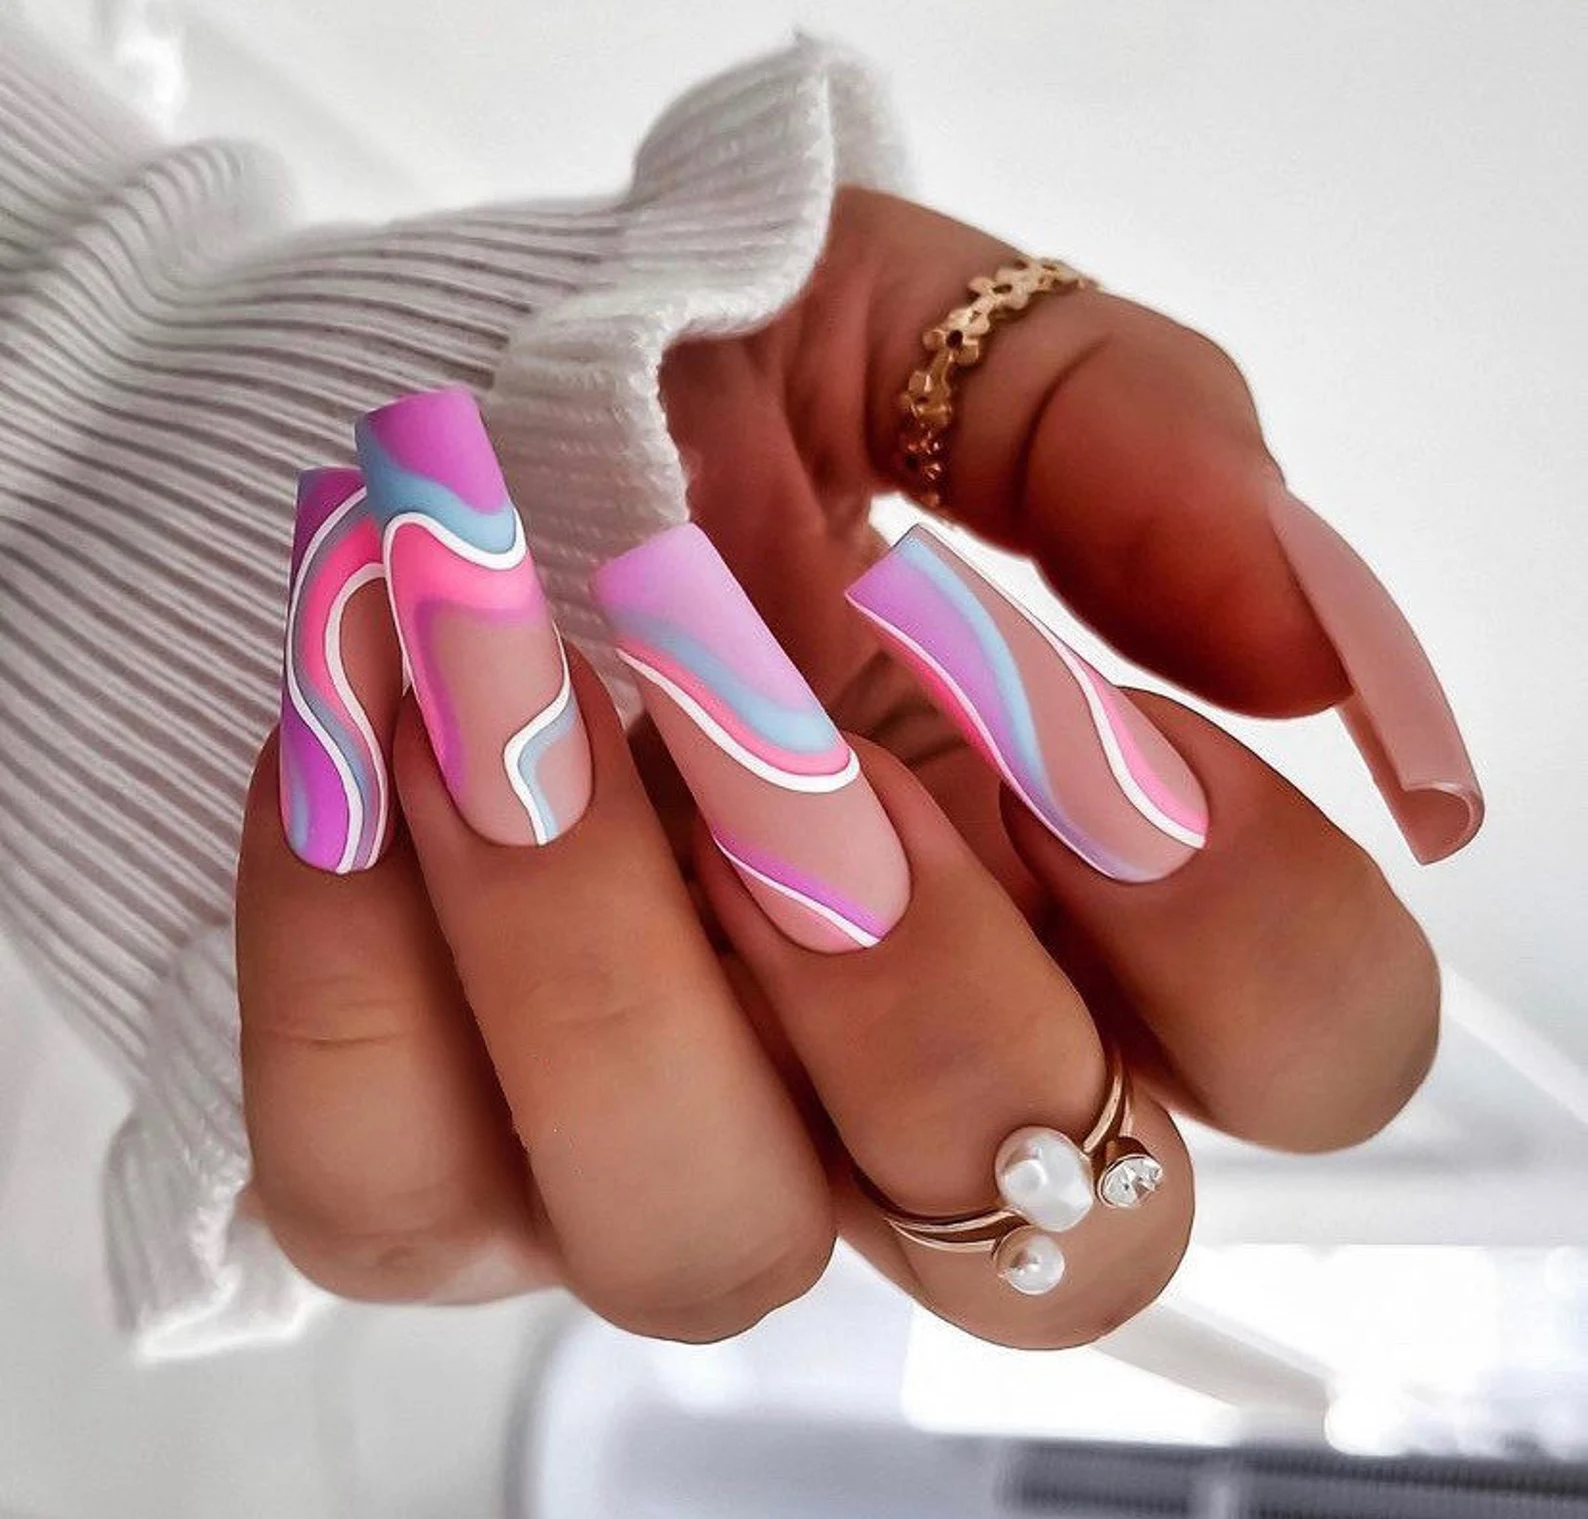 50 Spring Nail Ideas That Are Seriously Trending in 2023 - College Fashion